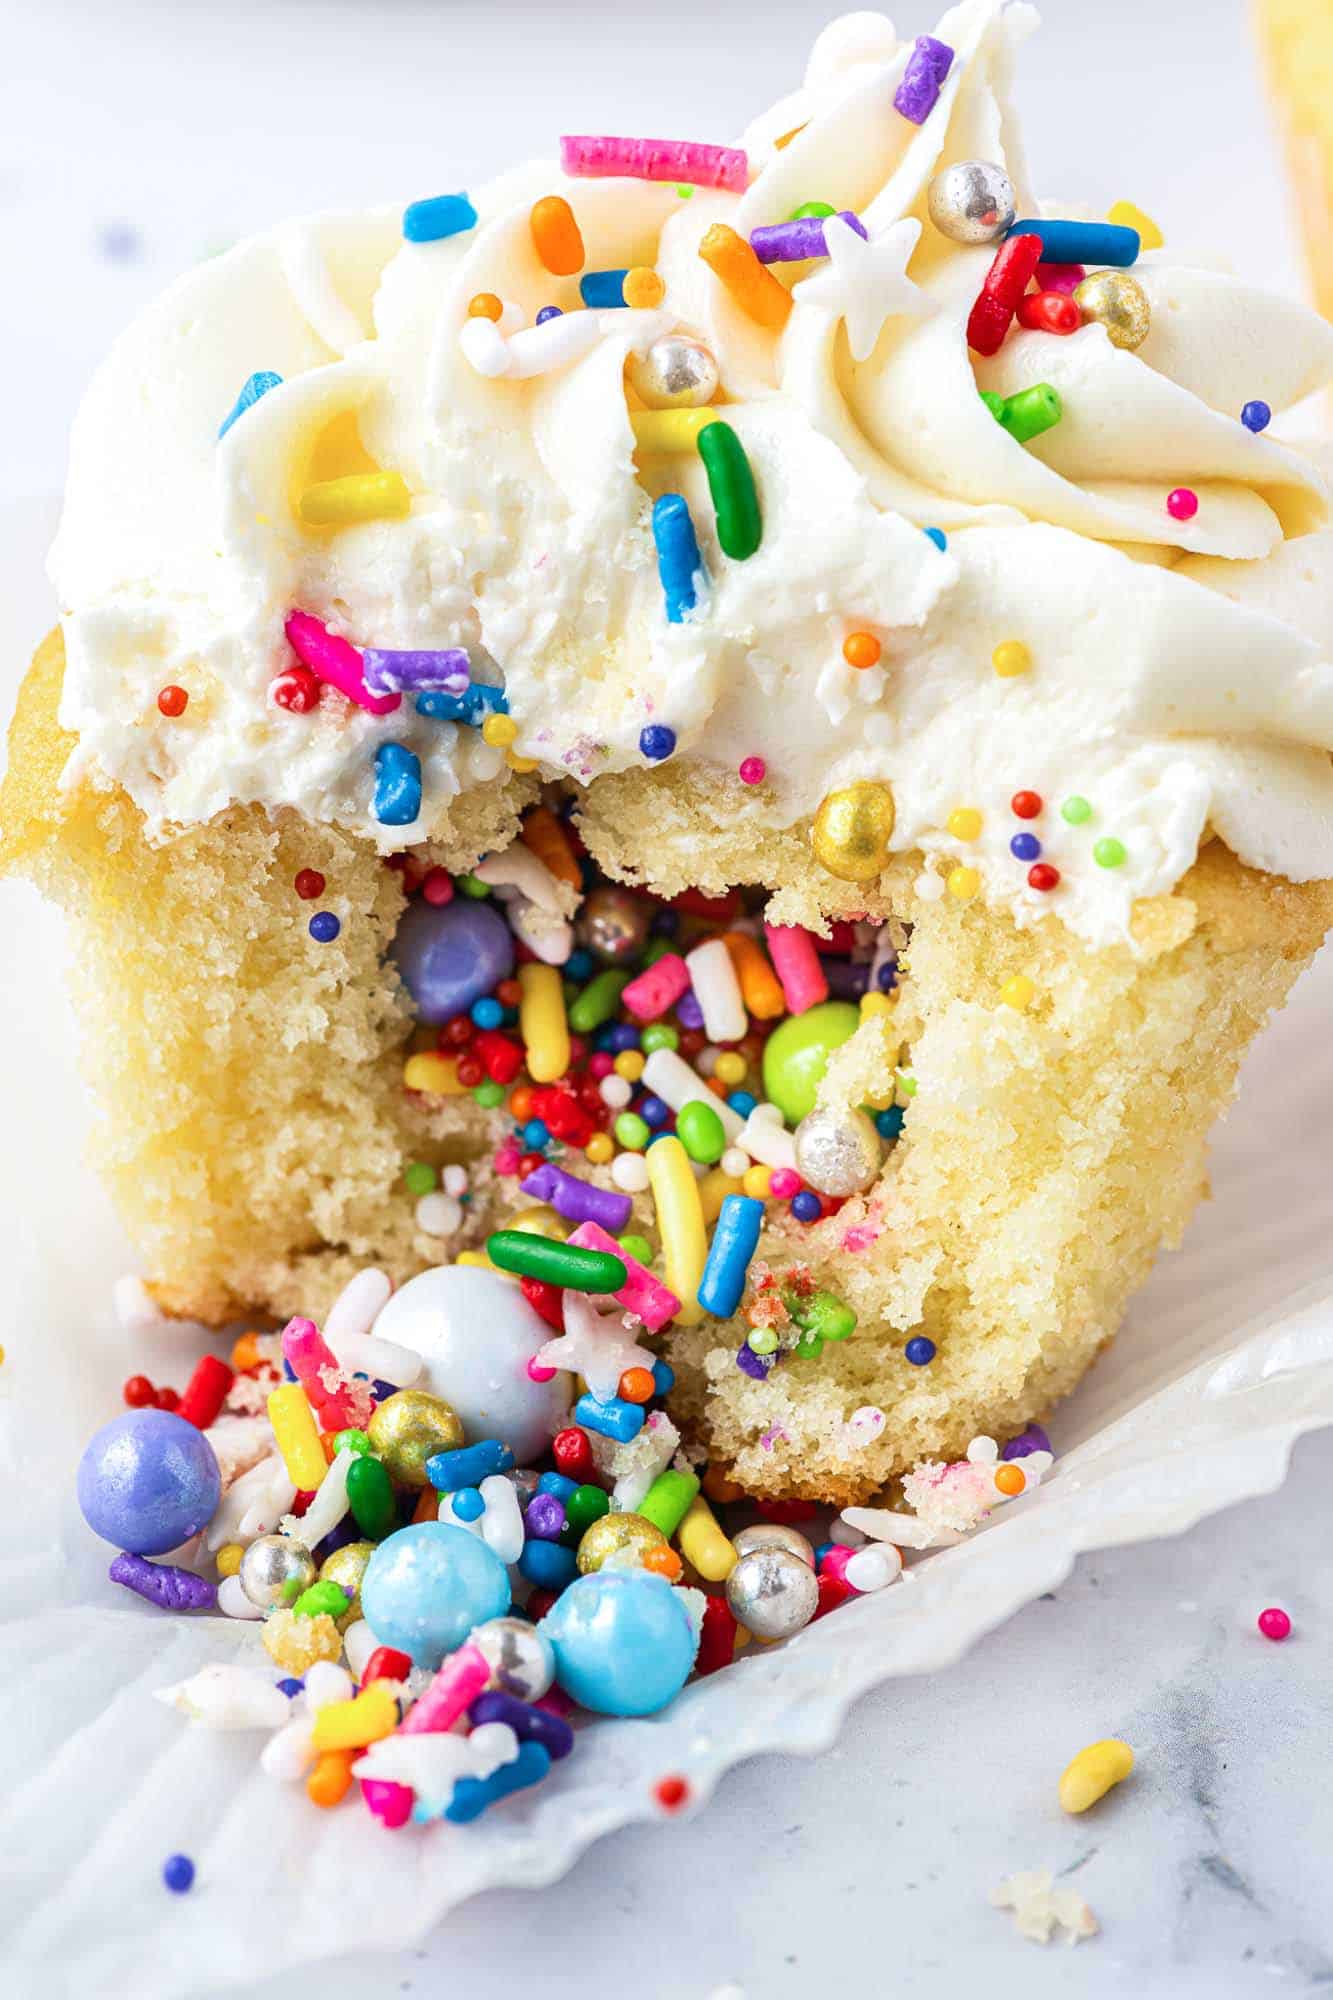 Pinata style vanilla cupcake with vanilla buttercream frosting opened to reveal cascade of rainbow sprinkles and topped with rainbow sprinkles.